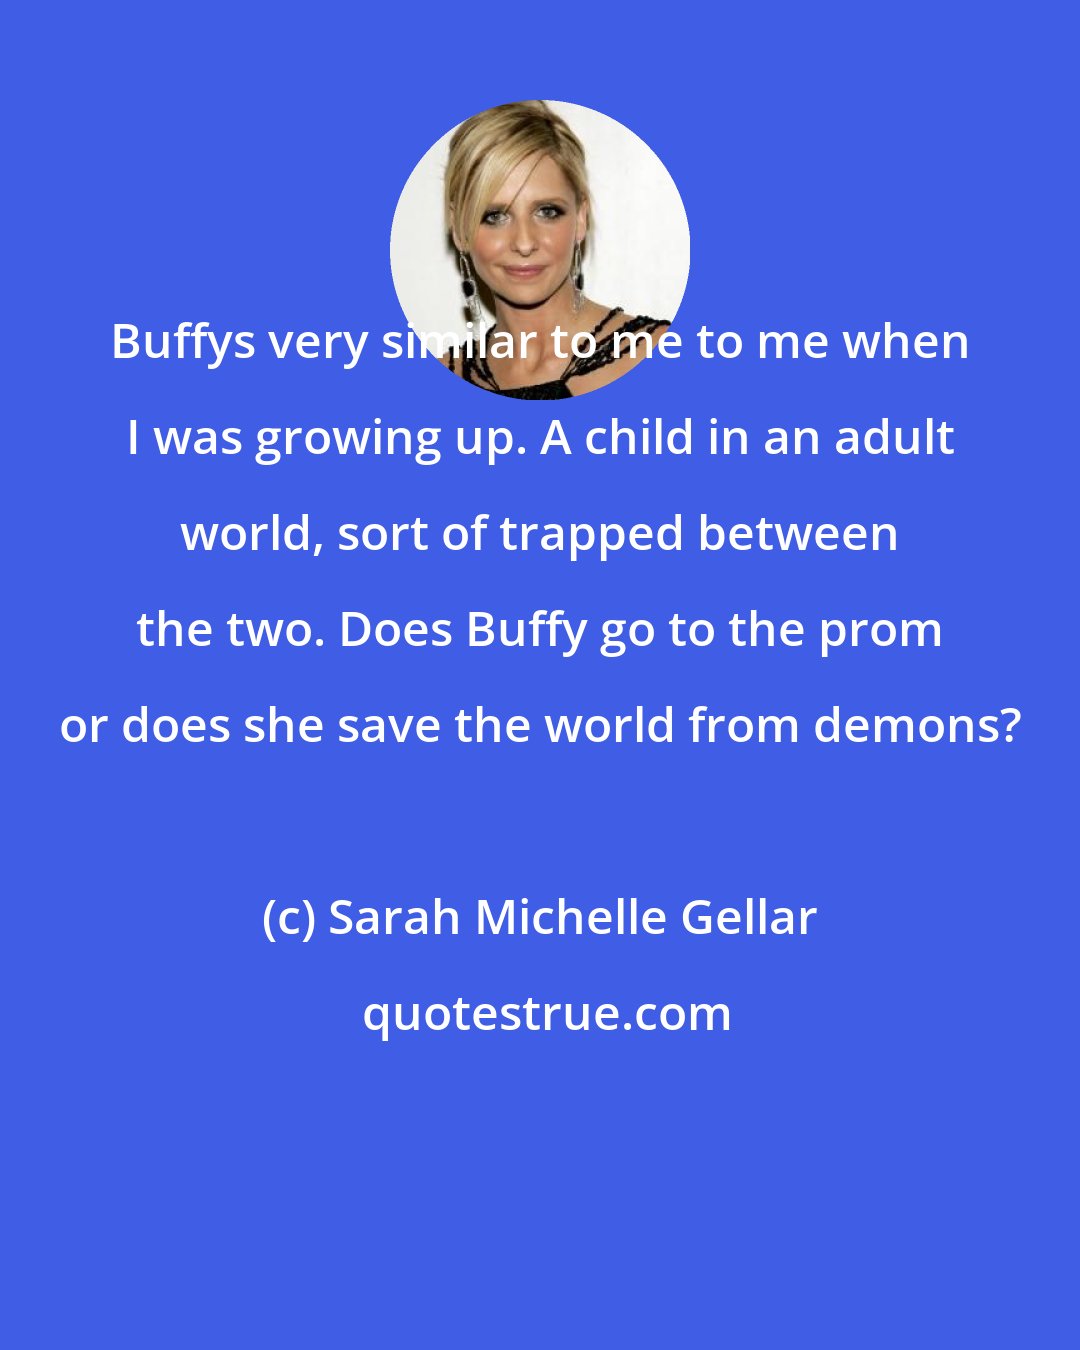 Sarah Michelle Gellar: Buffys very similar to me to me when I was growing up. A child in an adult world, sort of trapped between the two. Does Buffy go to the prom or does she save the world from demons?